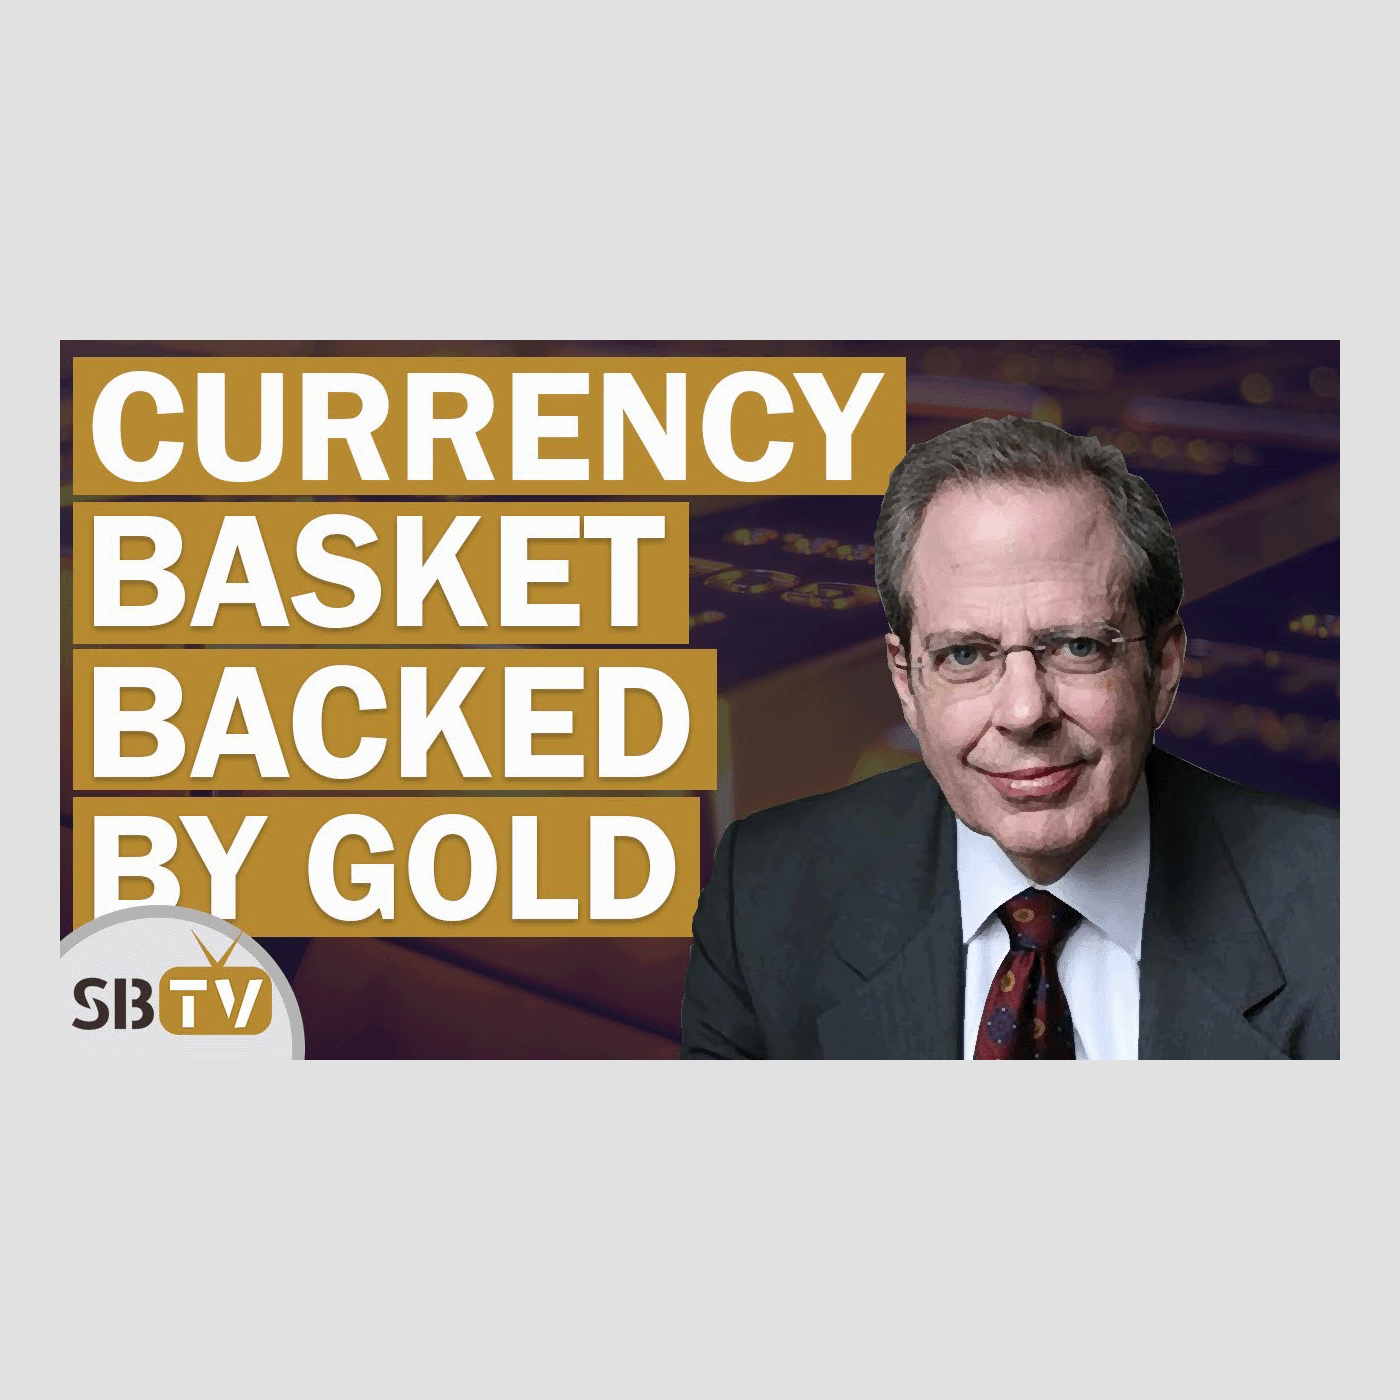 269 Stephen Leeb - BRICS Wants a Currency Basket Backed by Gold